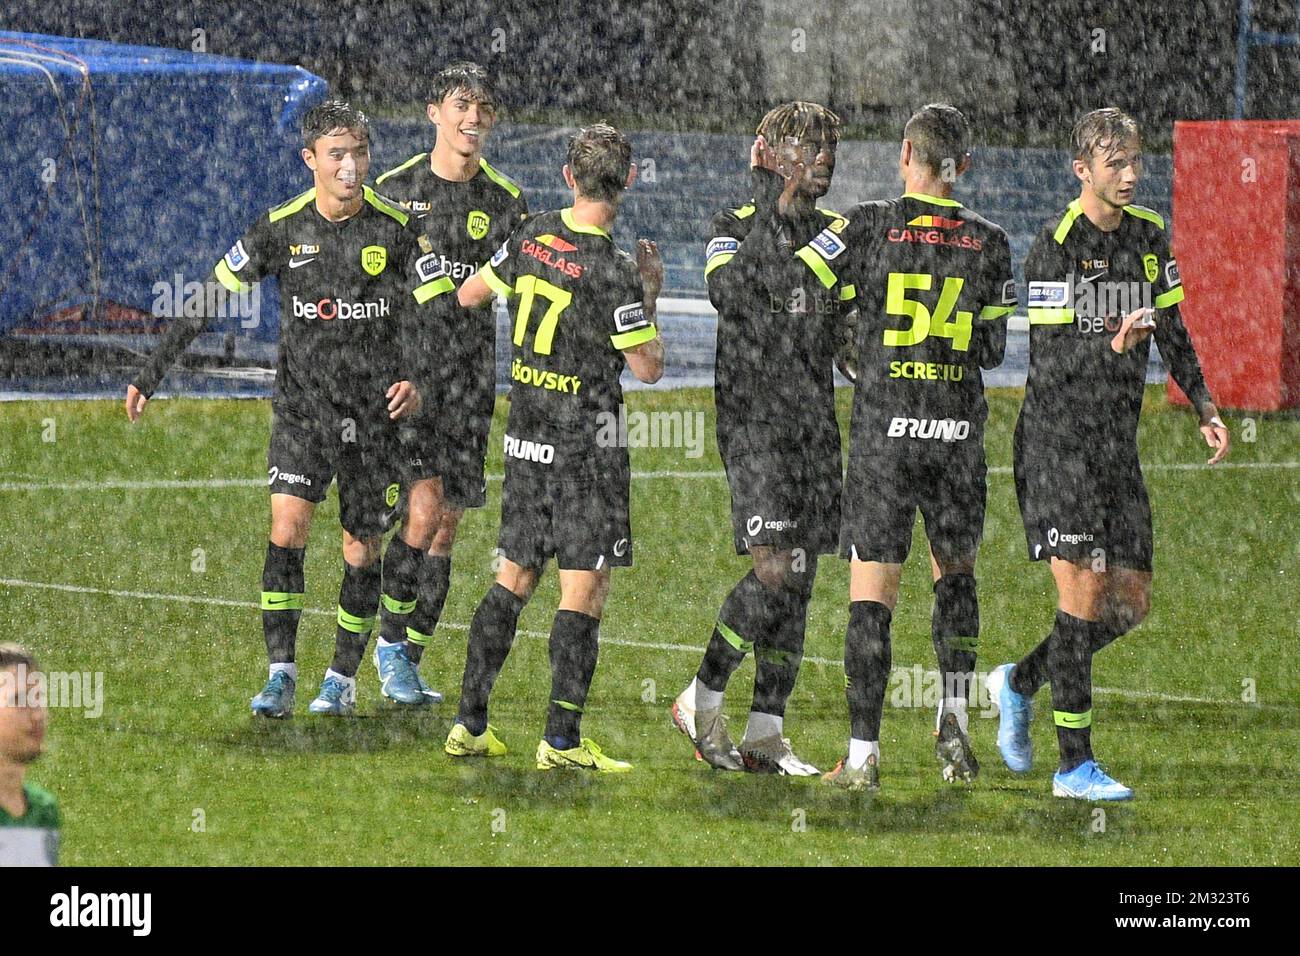 Genk's Luca Oyen celebrates after scoring during a friendly soccer match between KRC Genk and Hungarian club Ferencvarosi Torna Club, during their winter training camps, Friday 10 January 2020 in La Nucia, Spain. BELGA PHOTO YORICK JANSENS Stock Photo